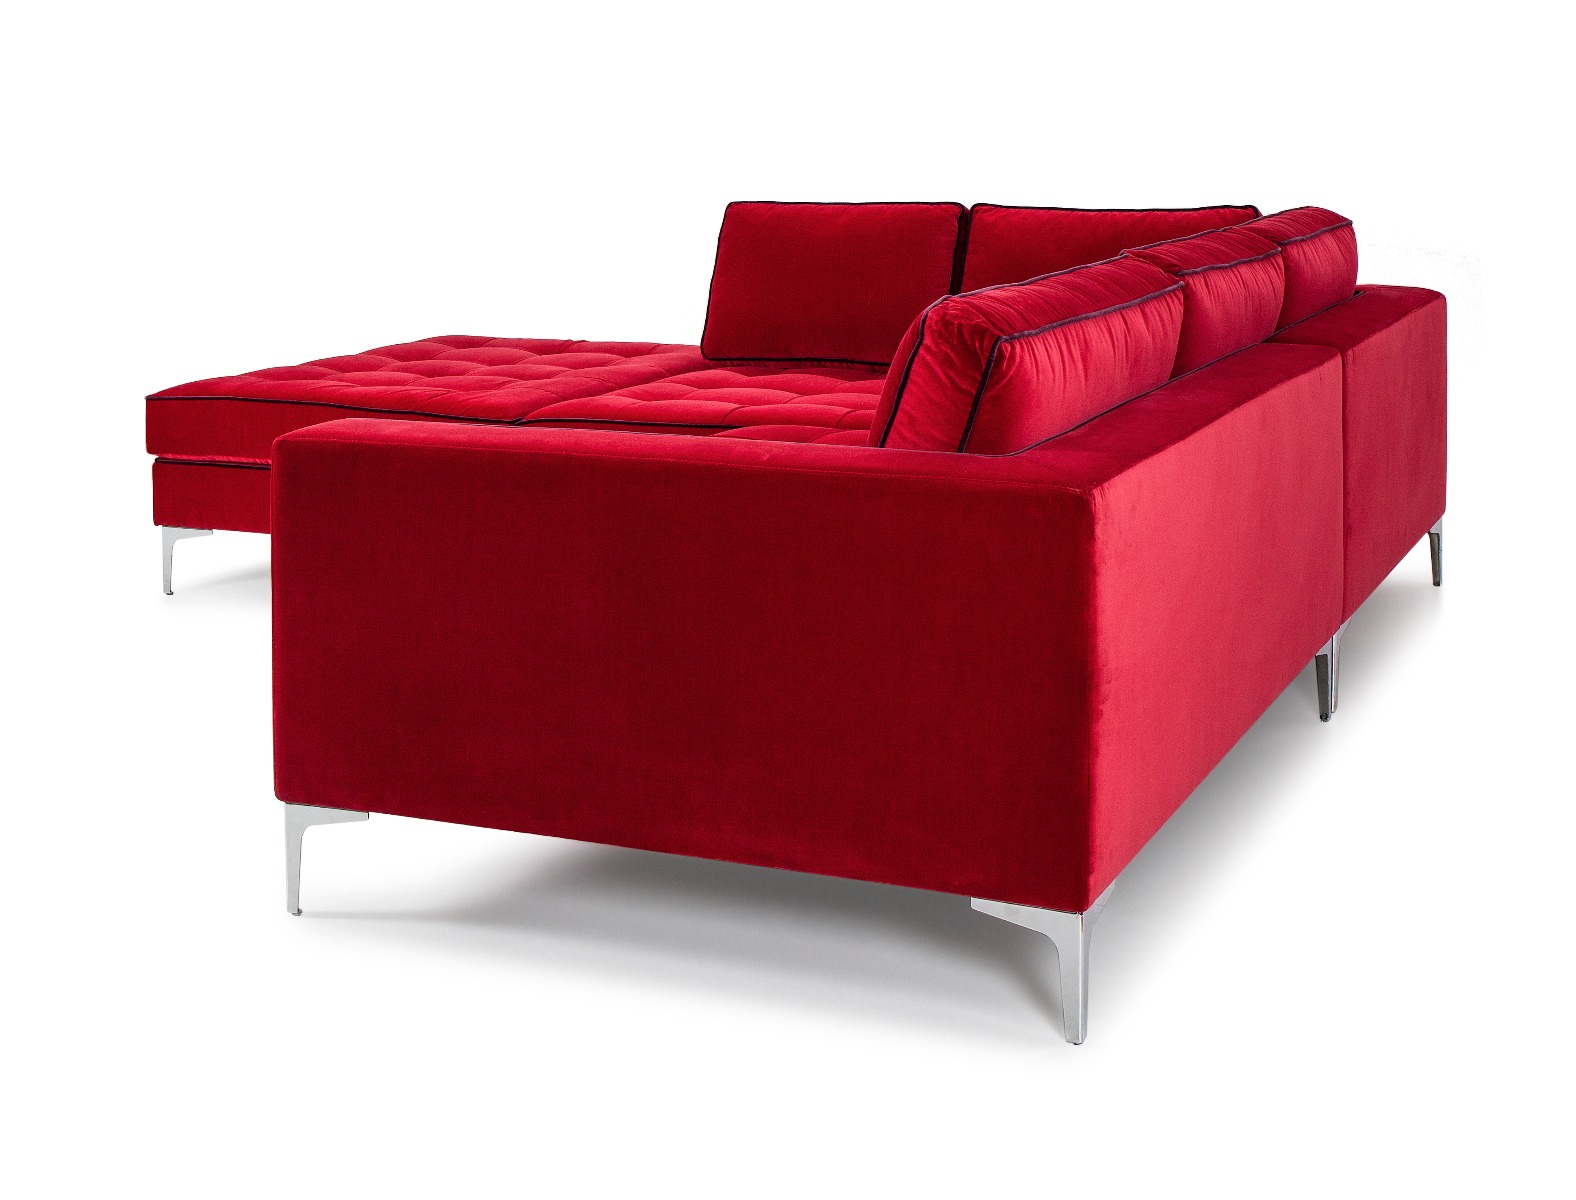 Luxury rich red Avant corner sofa with black piping by Luxuria London